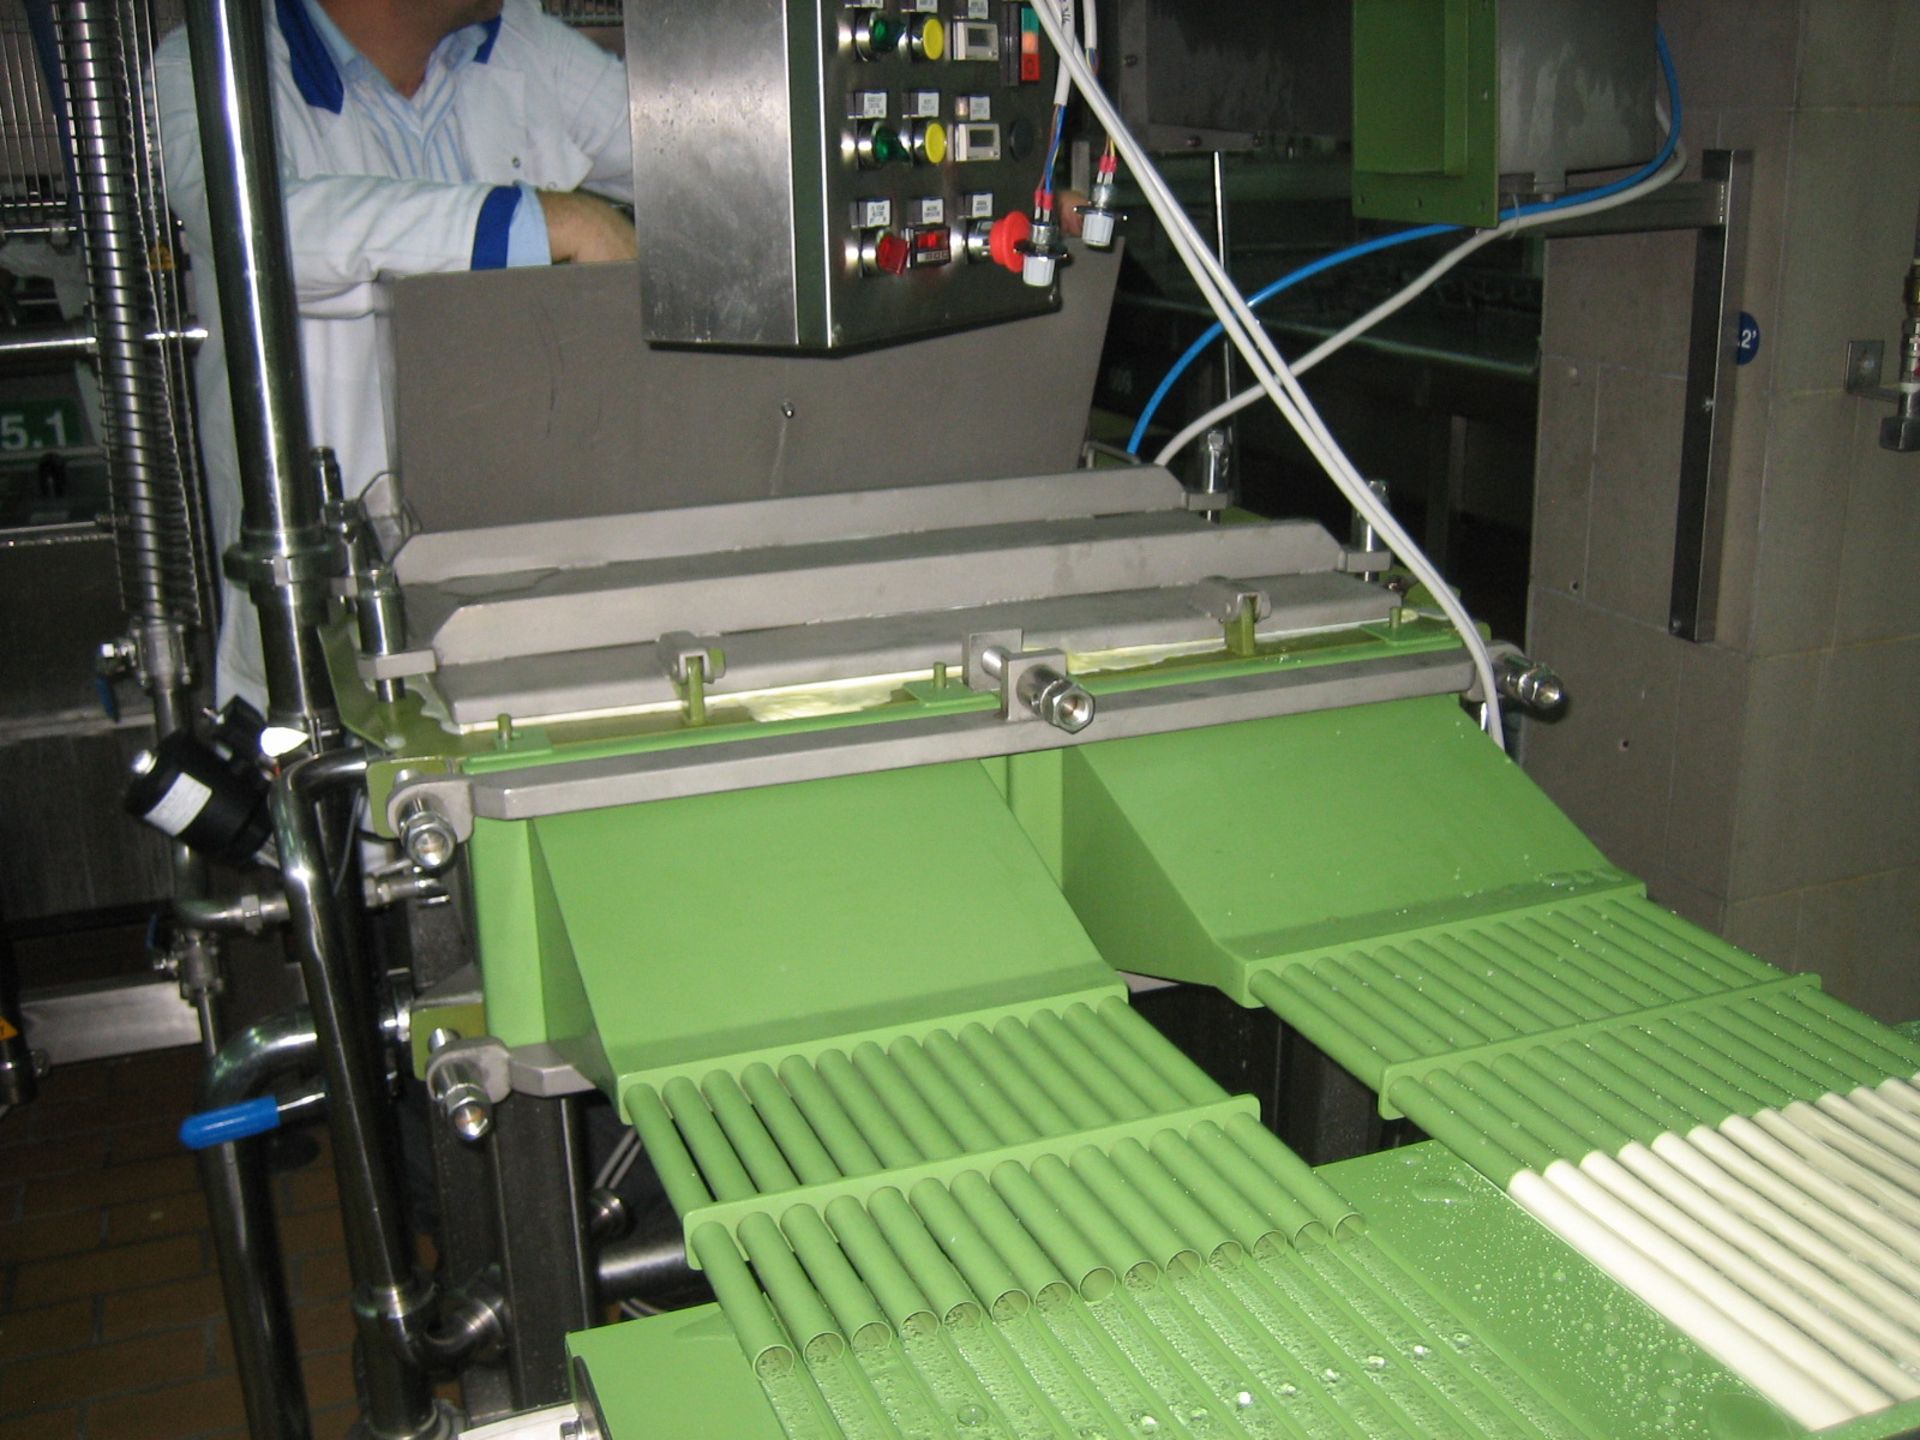 2X COMAT PROCESSING LINES FOR MOZZARELLA CHEESE TO PRODUCE MOZZARELLA STICKS AND MOZZARELLA BLOCKS - Image 9 of 11